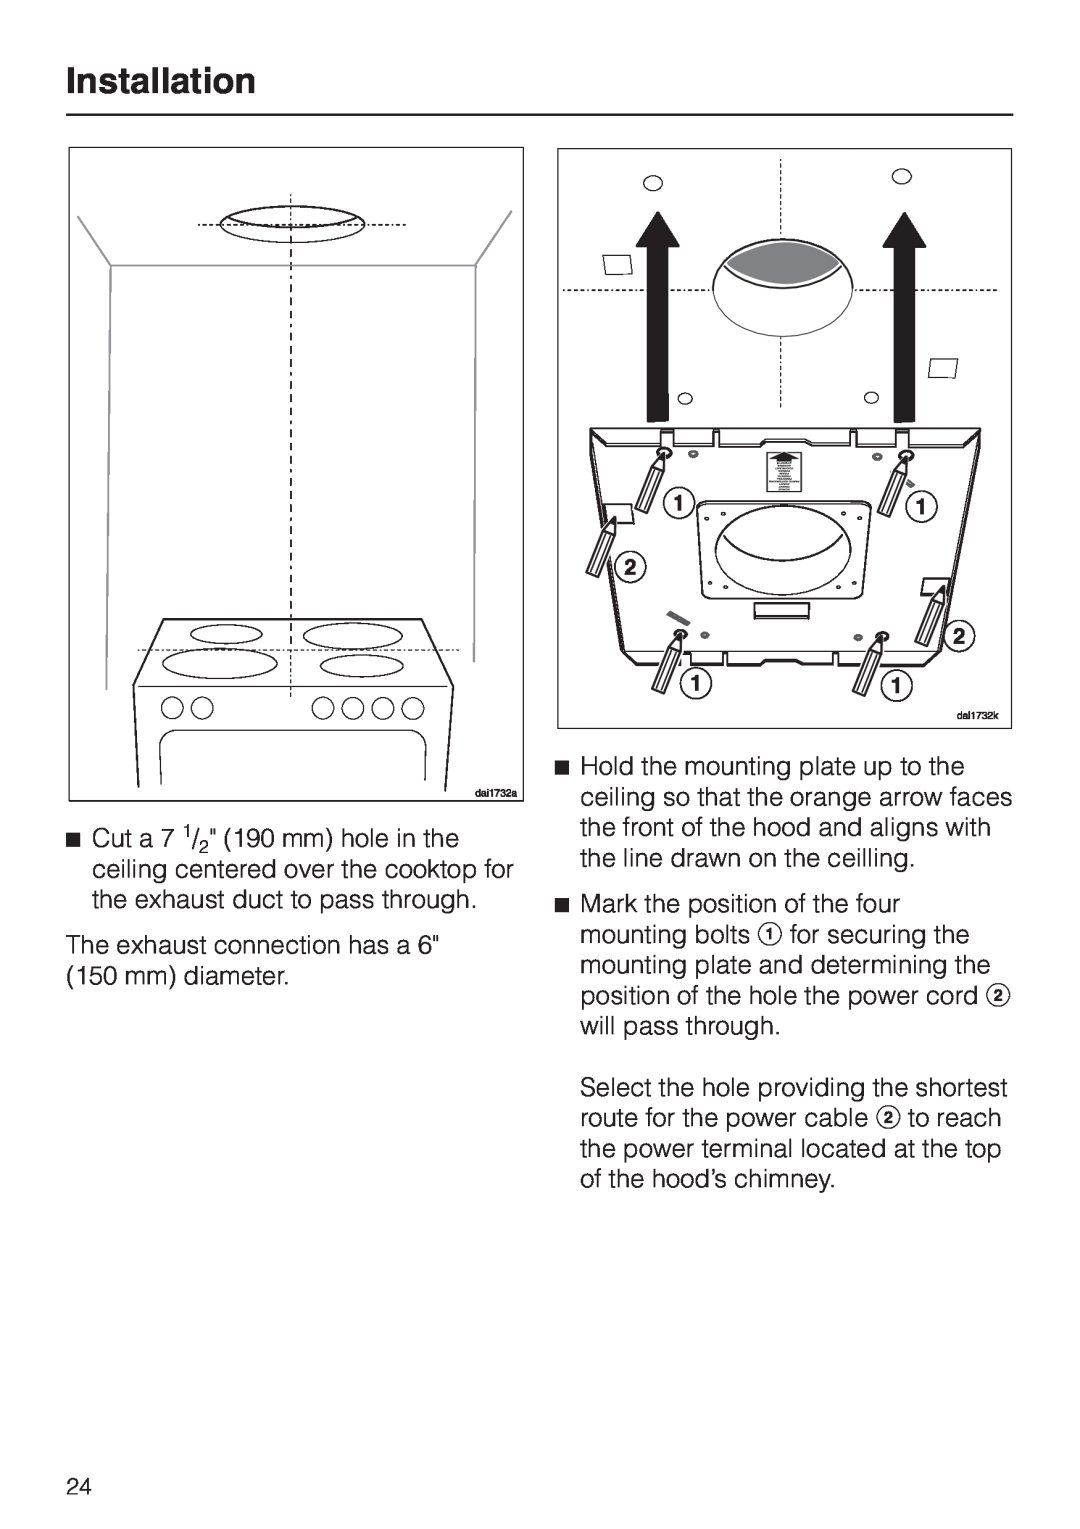 Miele DA220-3 installation instructions Installation, Hold the mounting plate up to the 